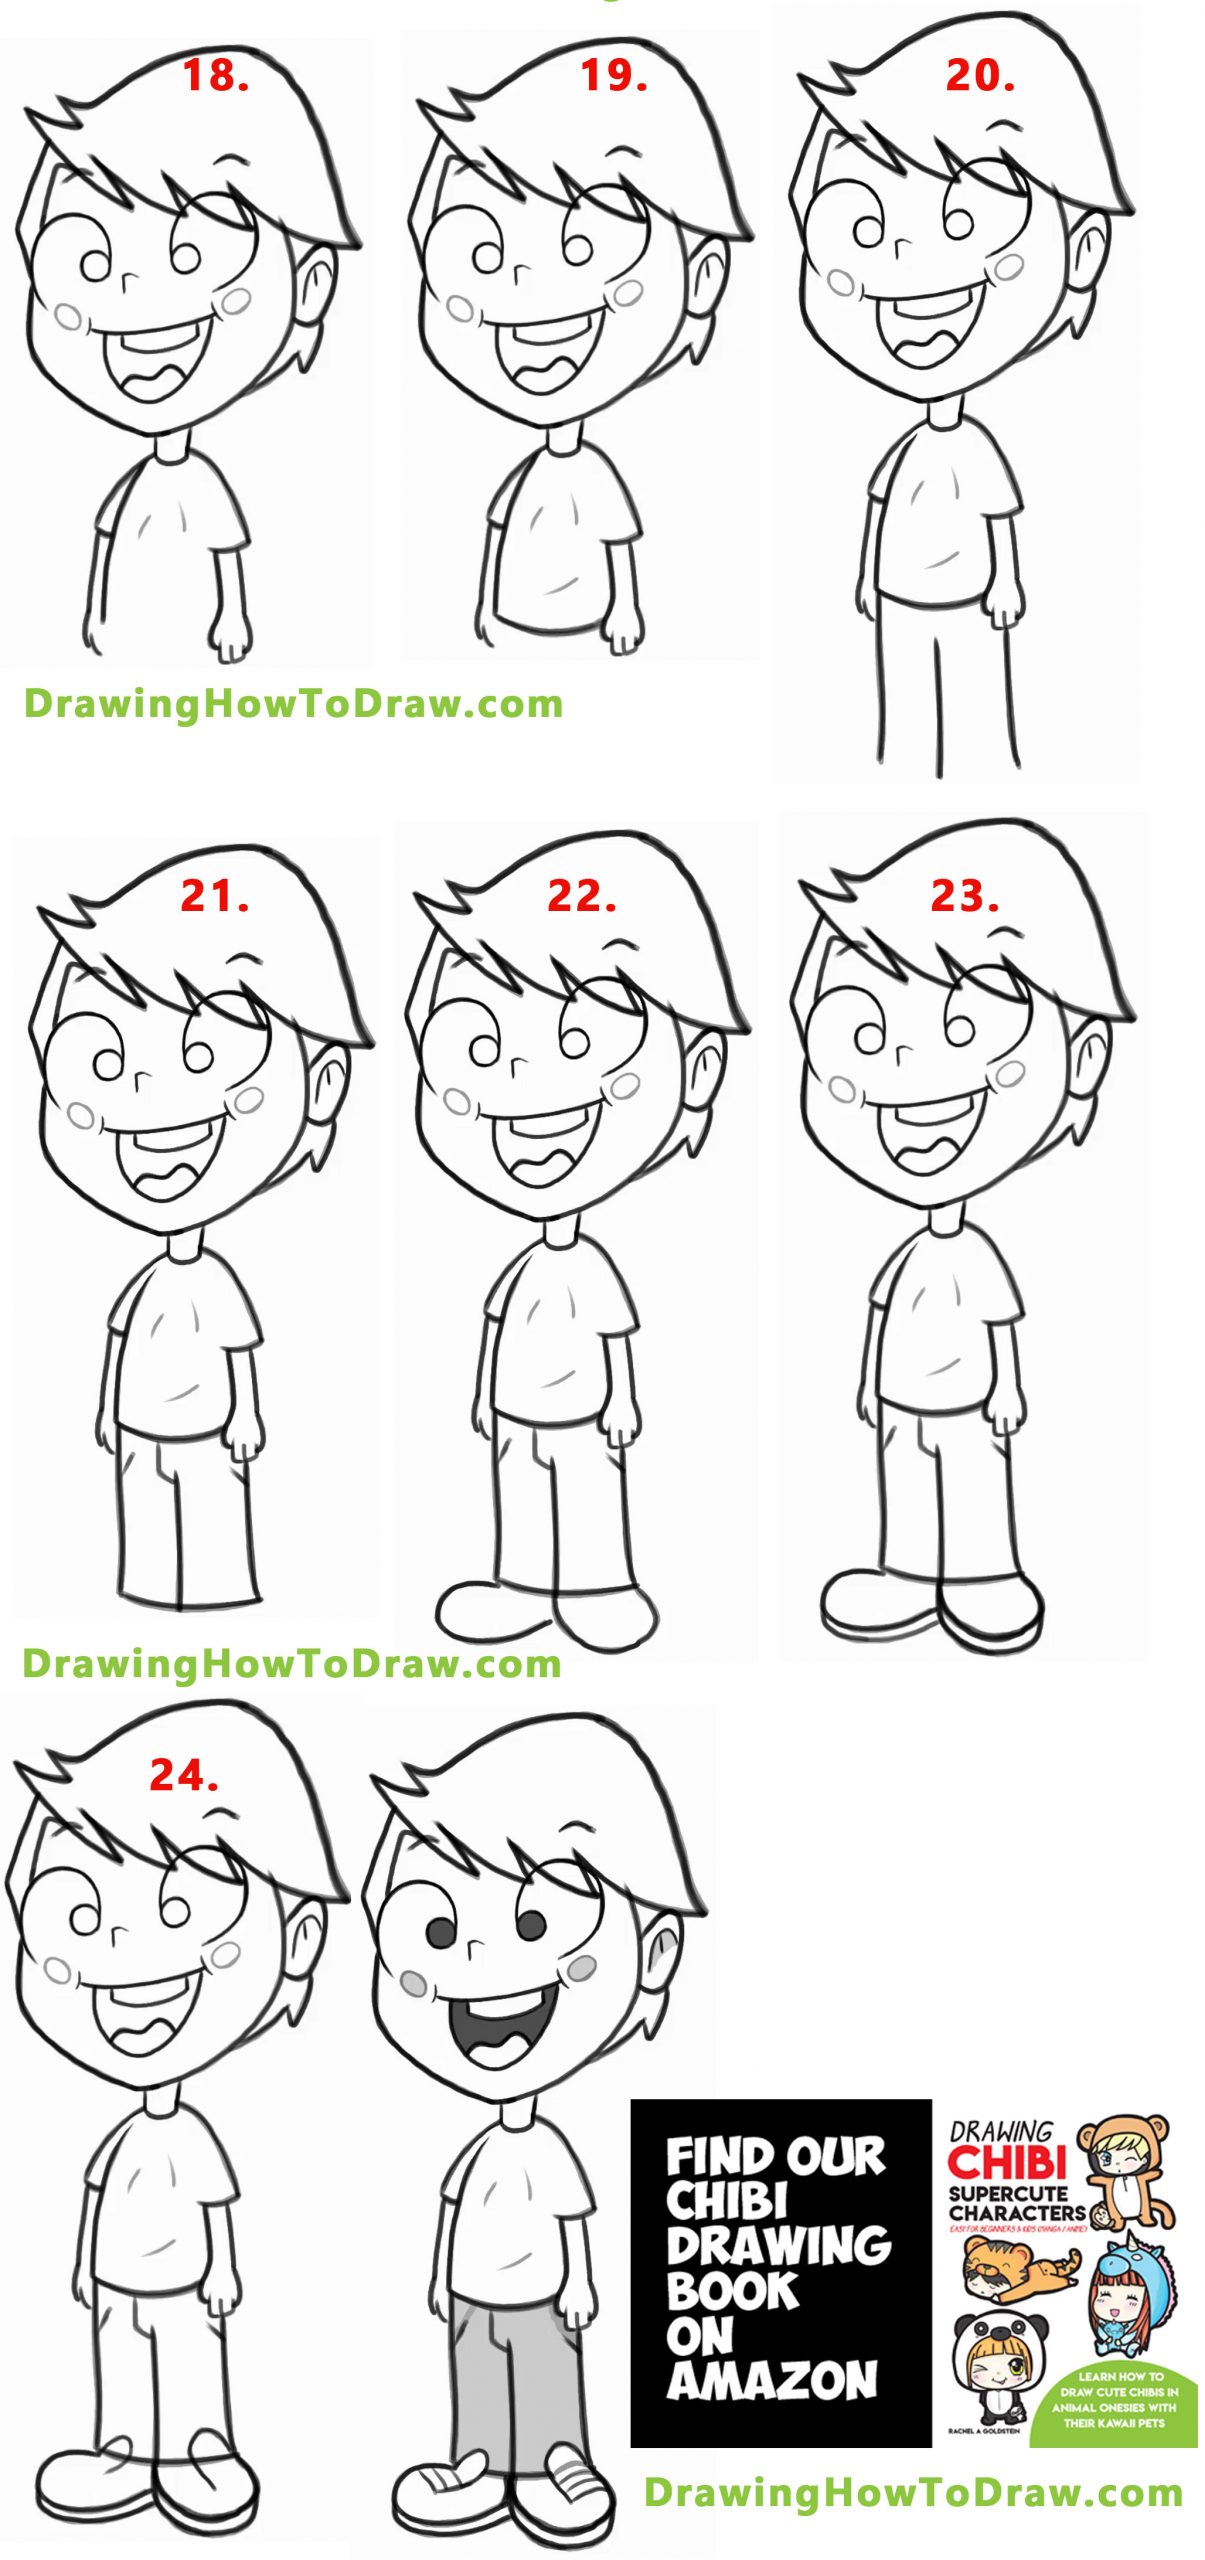 How To Draw a Simple Cartoon Step by Step  YouTube